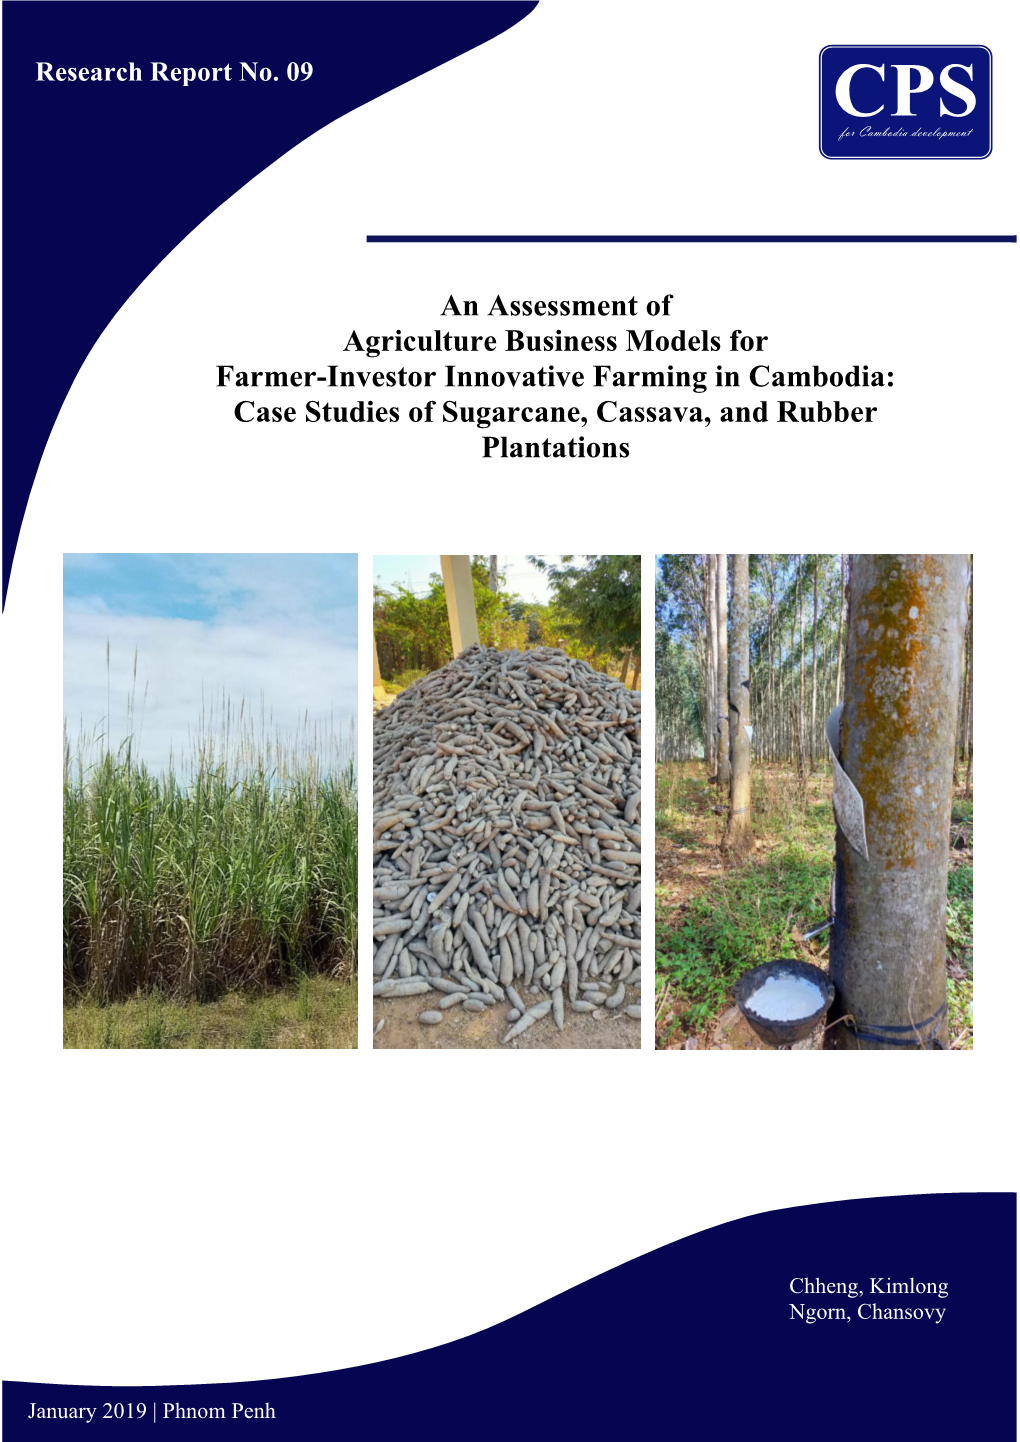 An Assessment of Agriculture Business Models for Farmer-Investor Innovative Farming in Cambodia: Case Studies of Sugarcane, Cassava, and Rubber Plantations